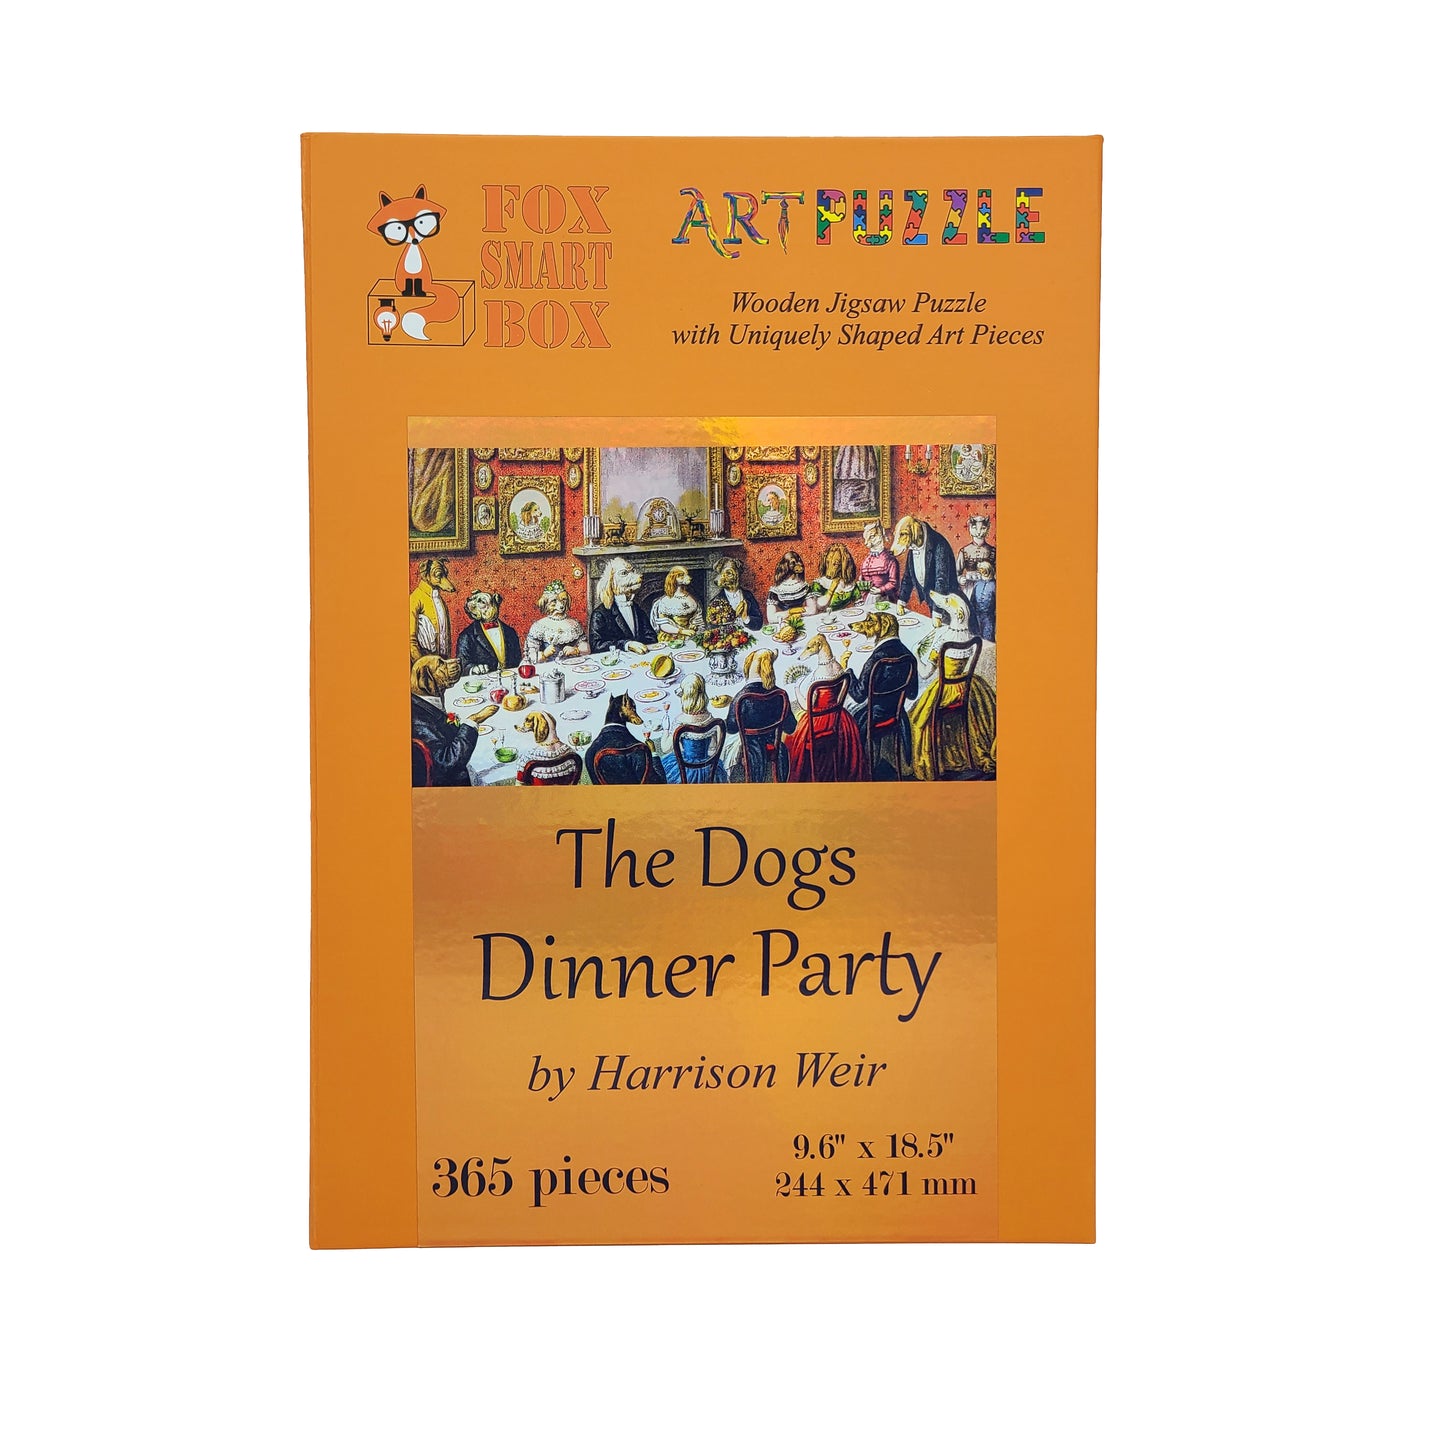 Wooden Jigsaw Puzzle with Uniquely Shaped Pieces for Adults - 365 Pieces - The Dogs dinner party